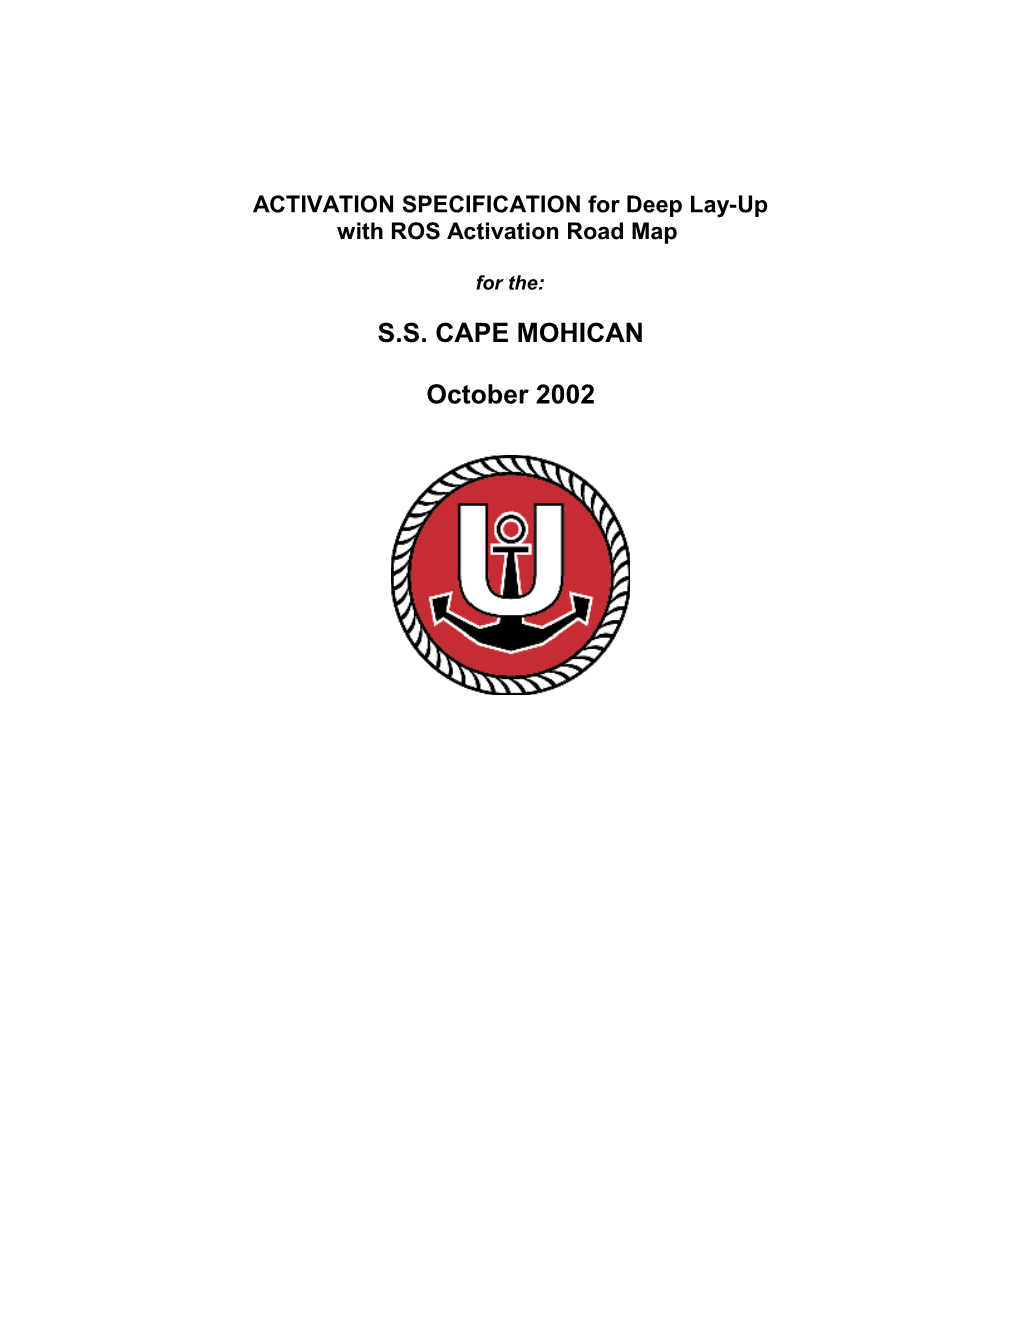 Cape Mohican Activation Specifications